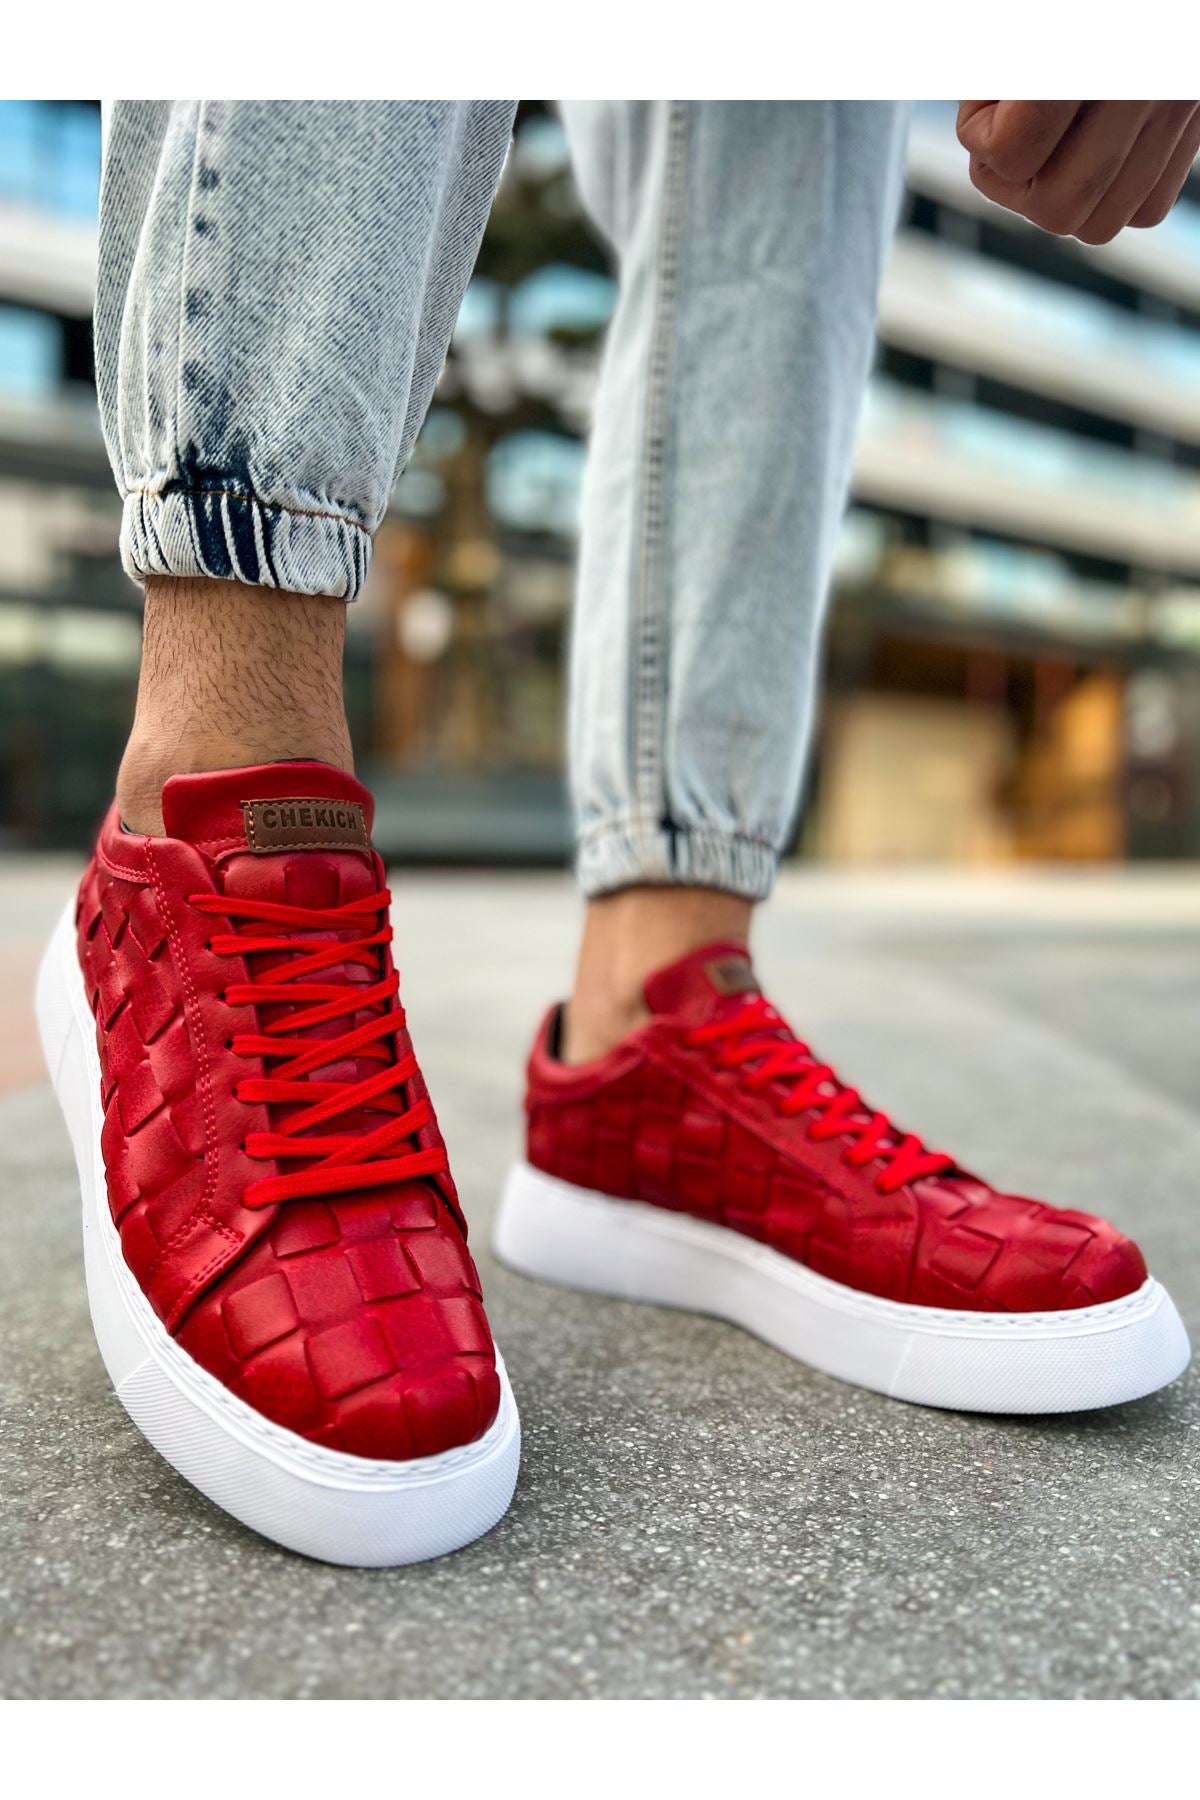 CH209 OBT Vimini Men's Shoes sneakers RED - STREETMODE ™